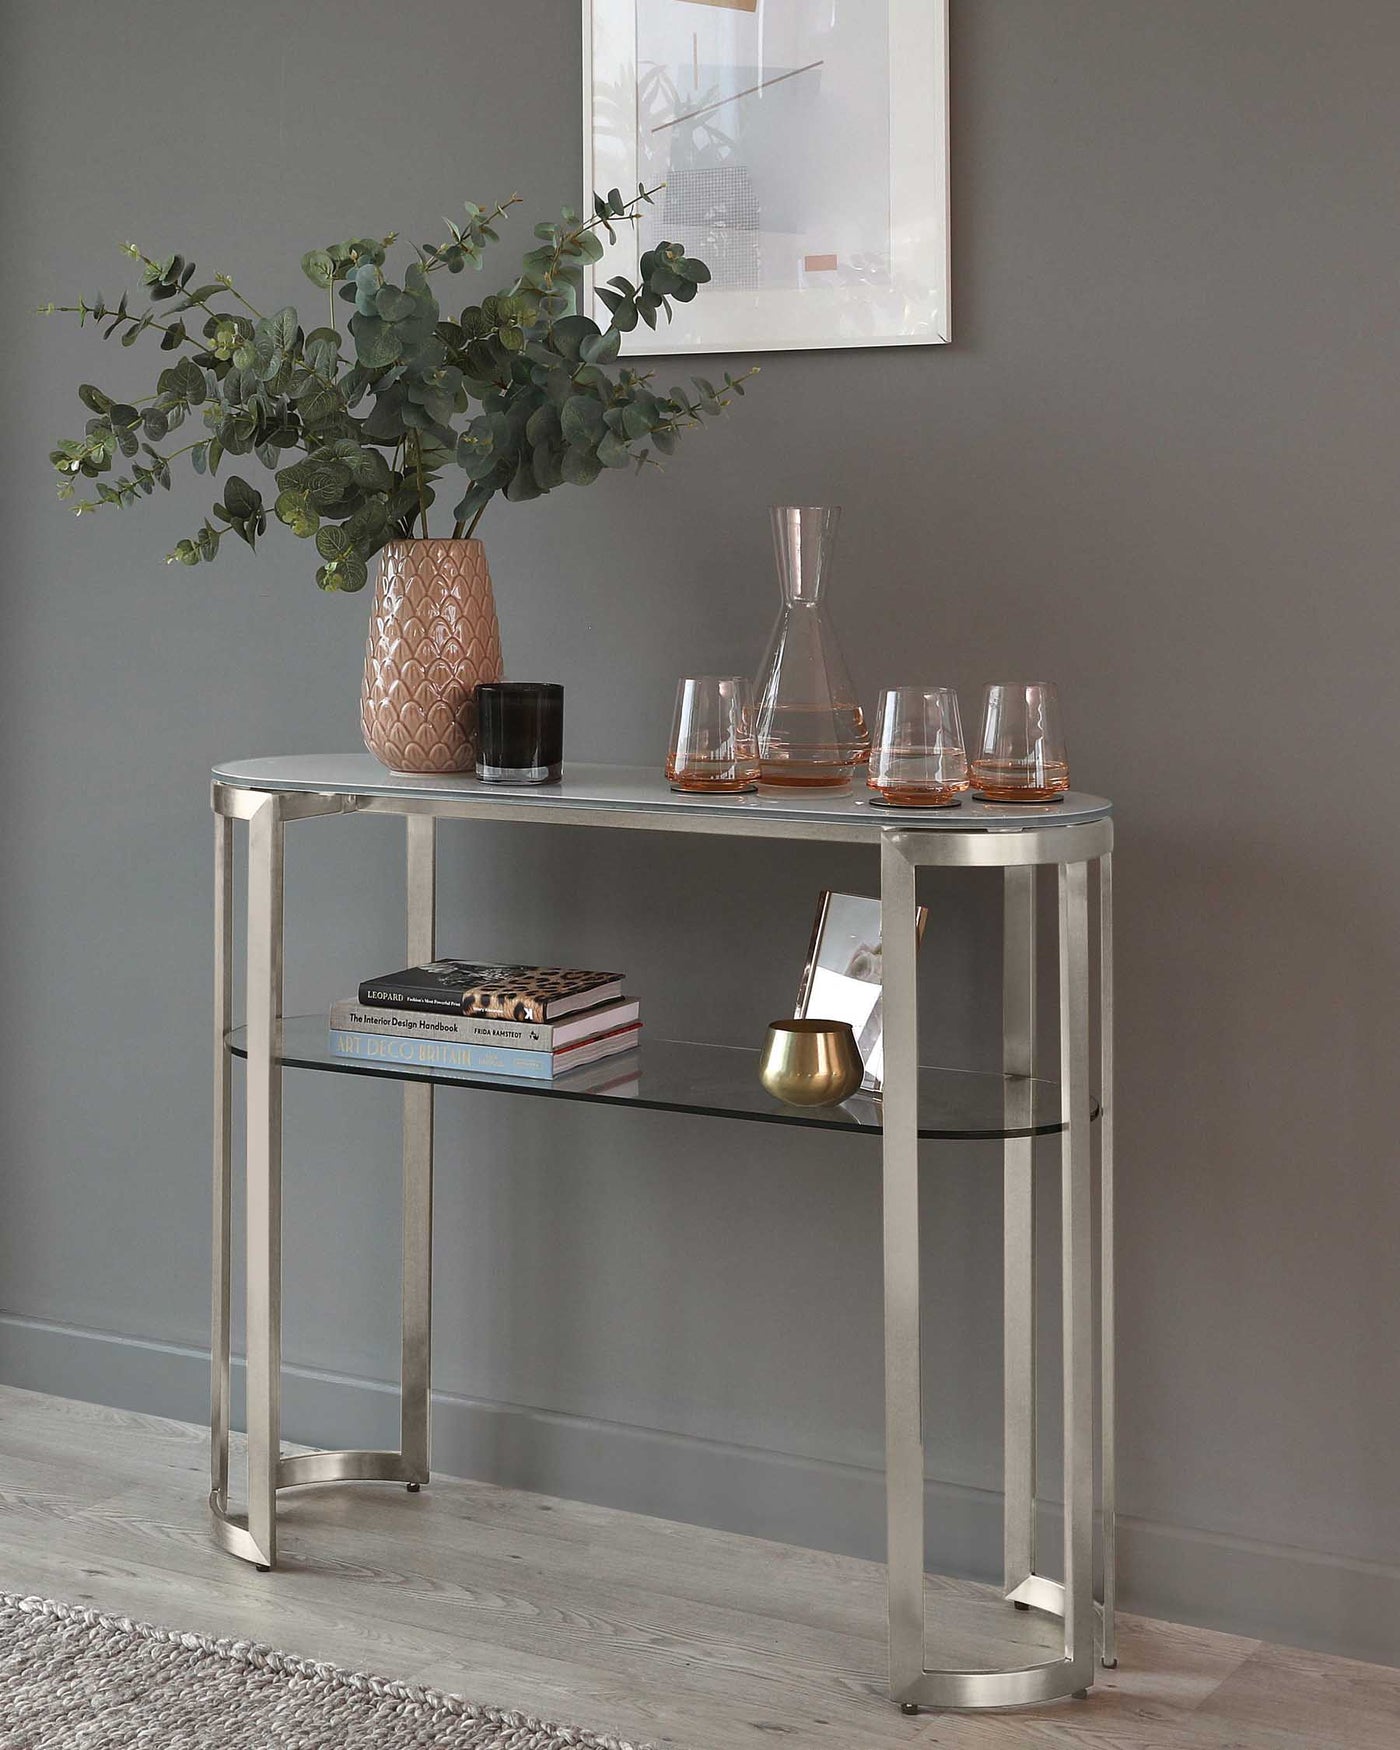 Elegant semi-circular silver console table with a mirrored top surface and a lower glass shelf, featuring slender metal frame and legs.